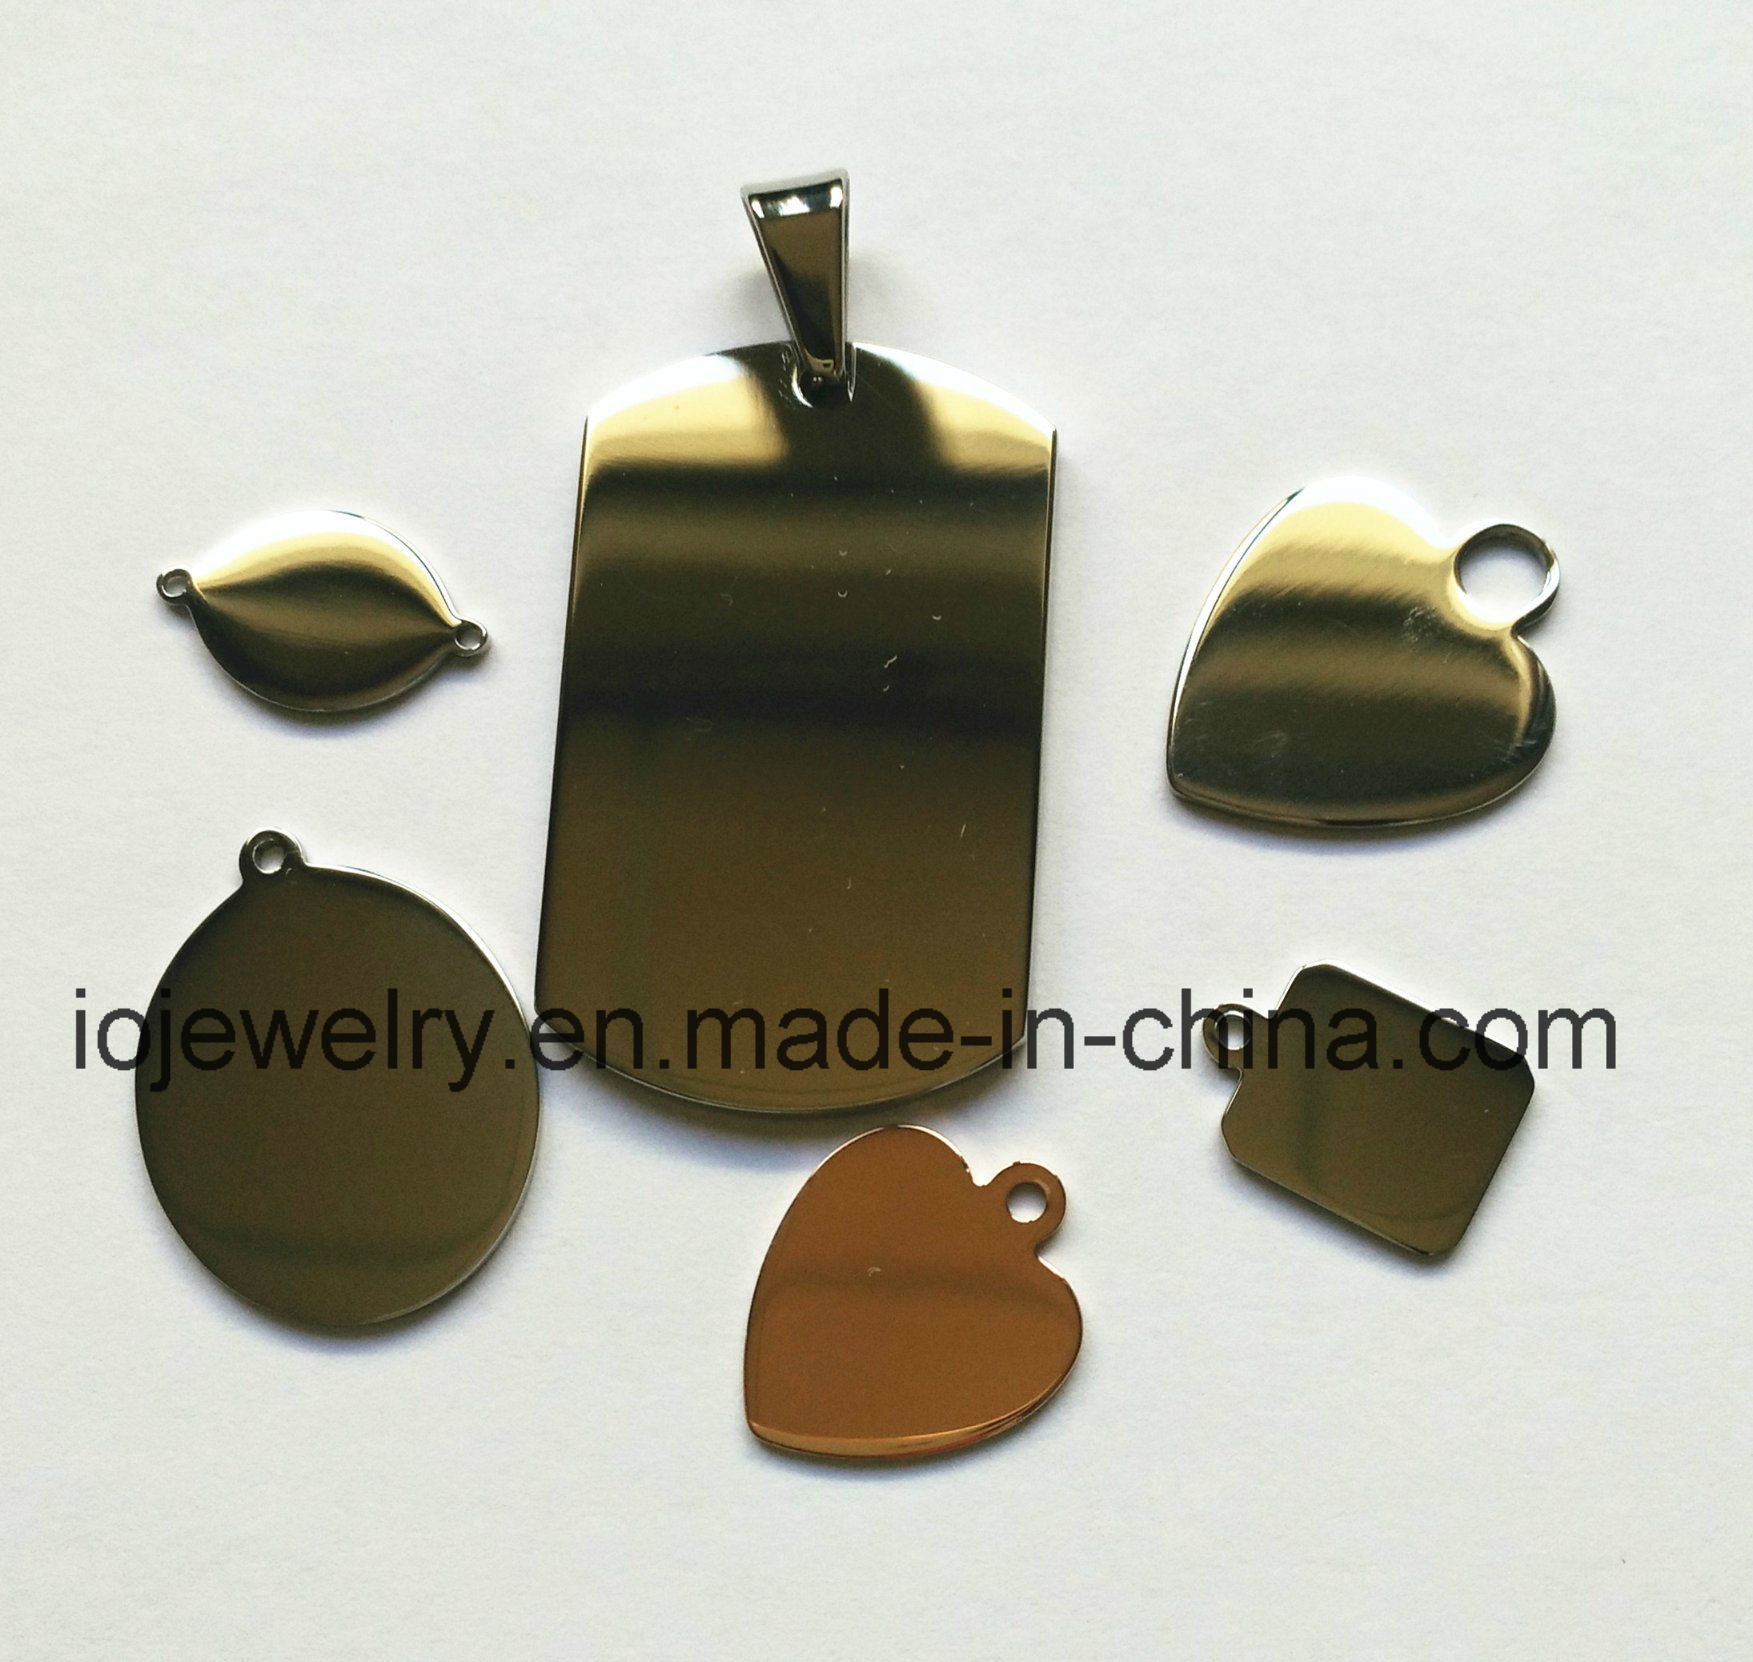 Mirror Polishing Ss Engraving Tags Square Round Heart Oval Shape